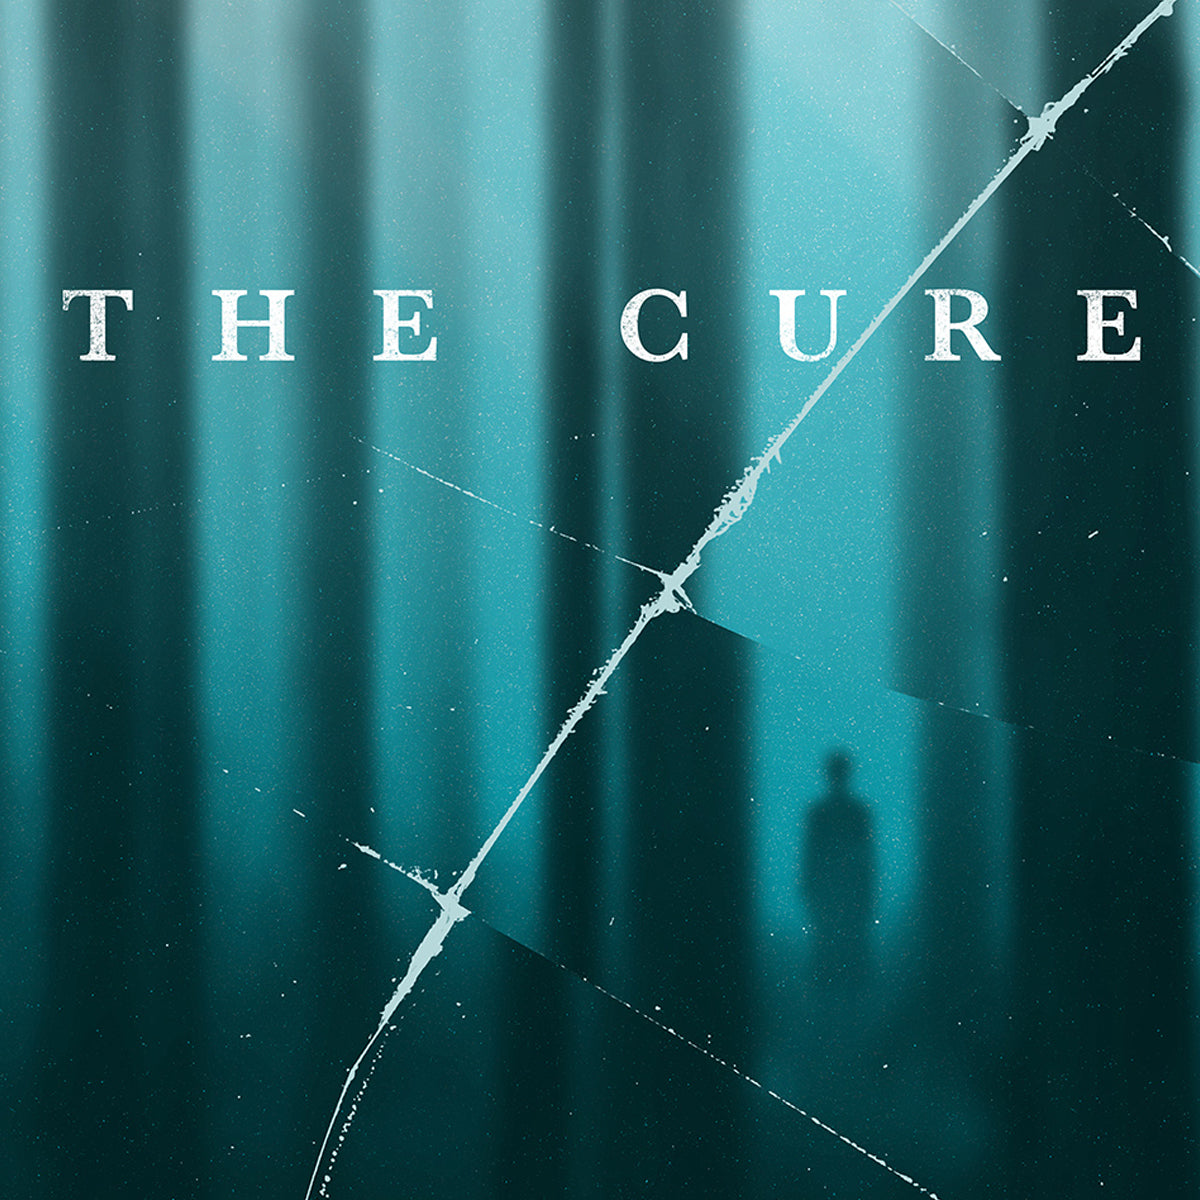 The Cure Vancouver June 2, 2023 Poster & Trading Card